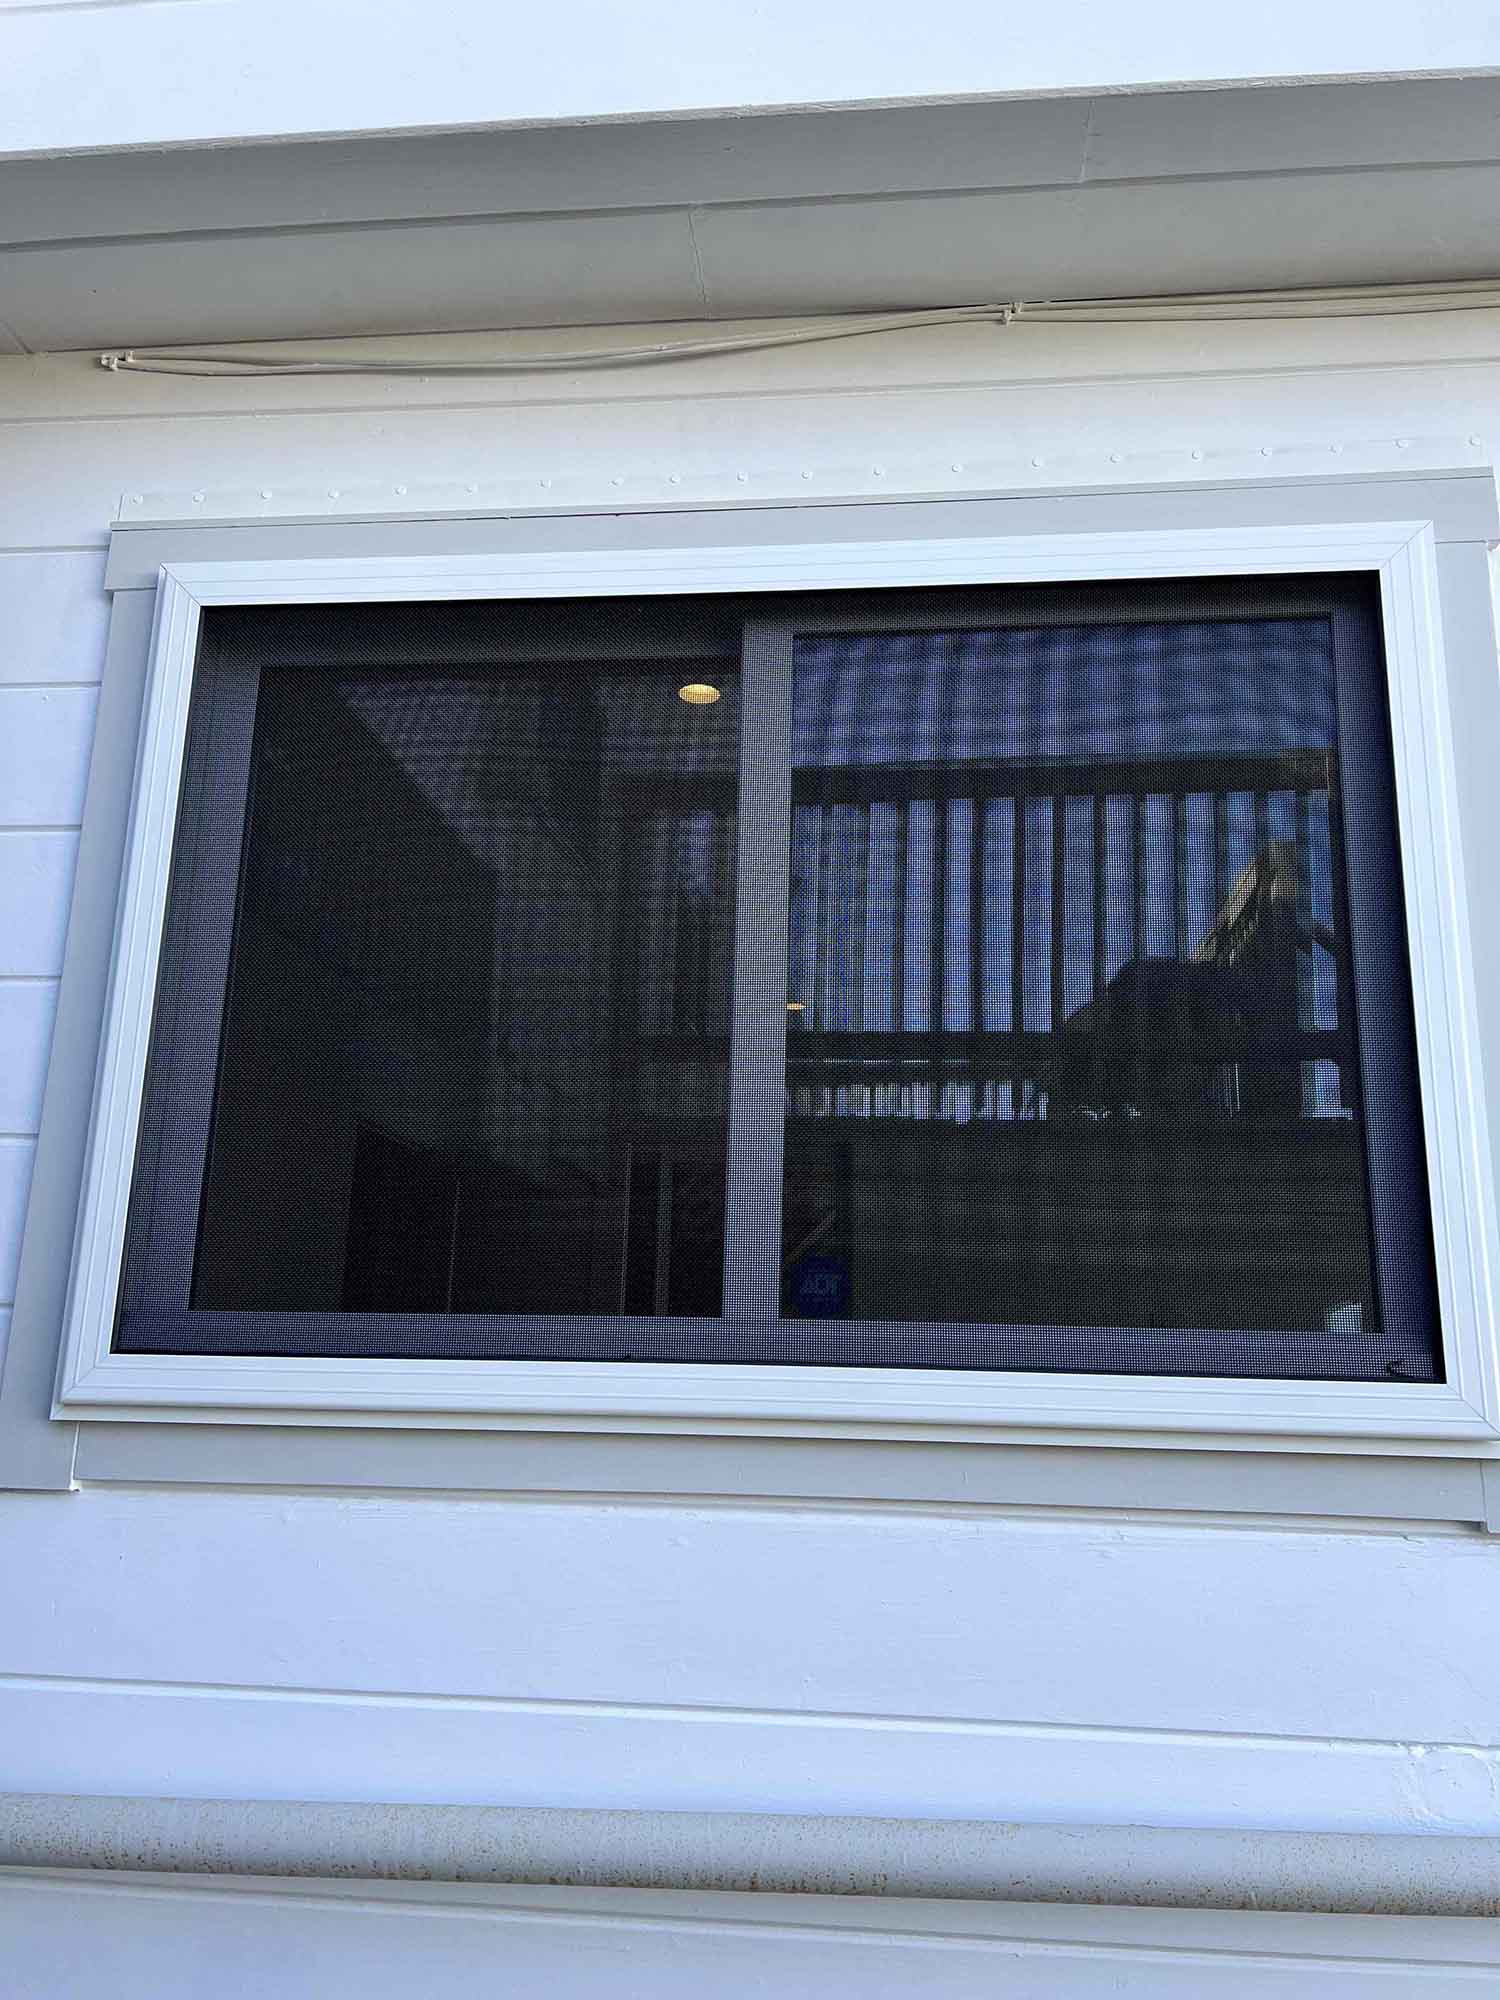 Crimsafe Window and Door Security Screens, installed by ClimatePro in San Francisco